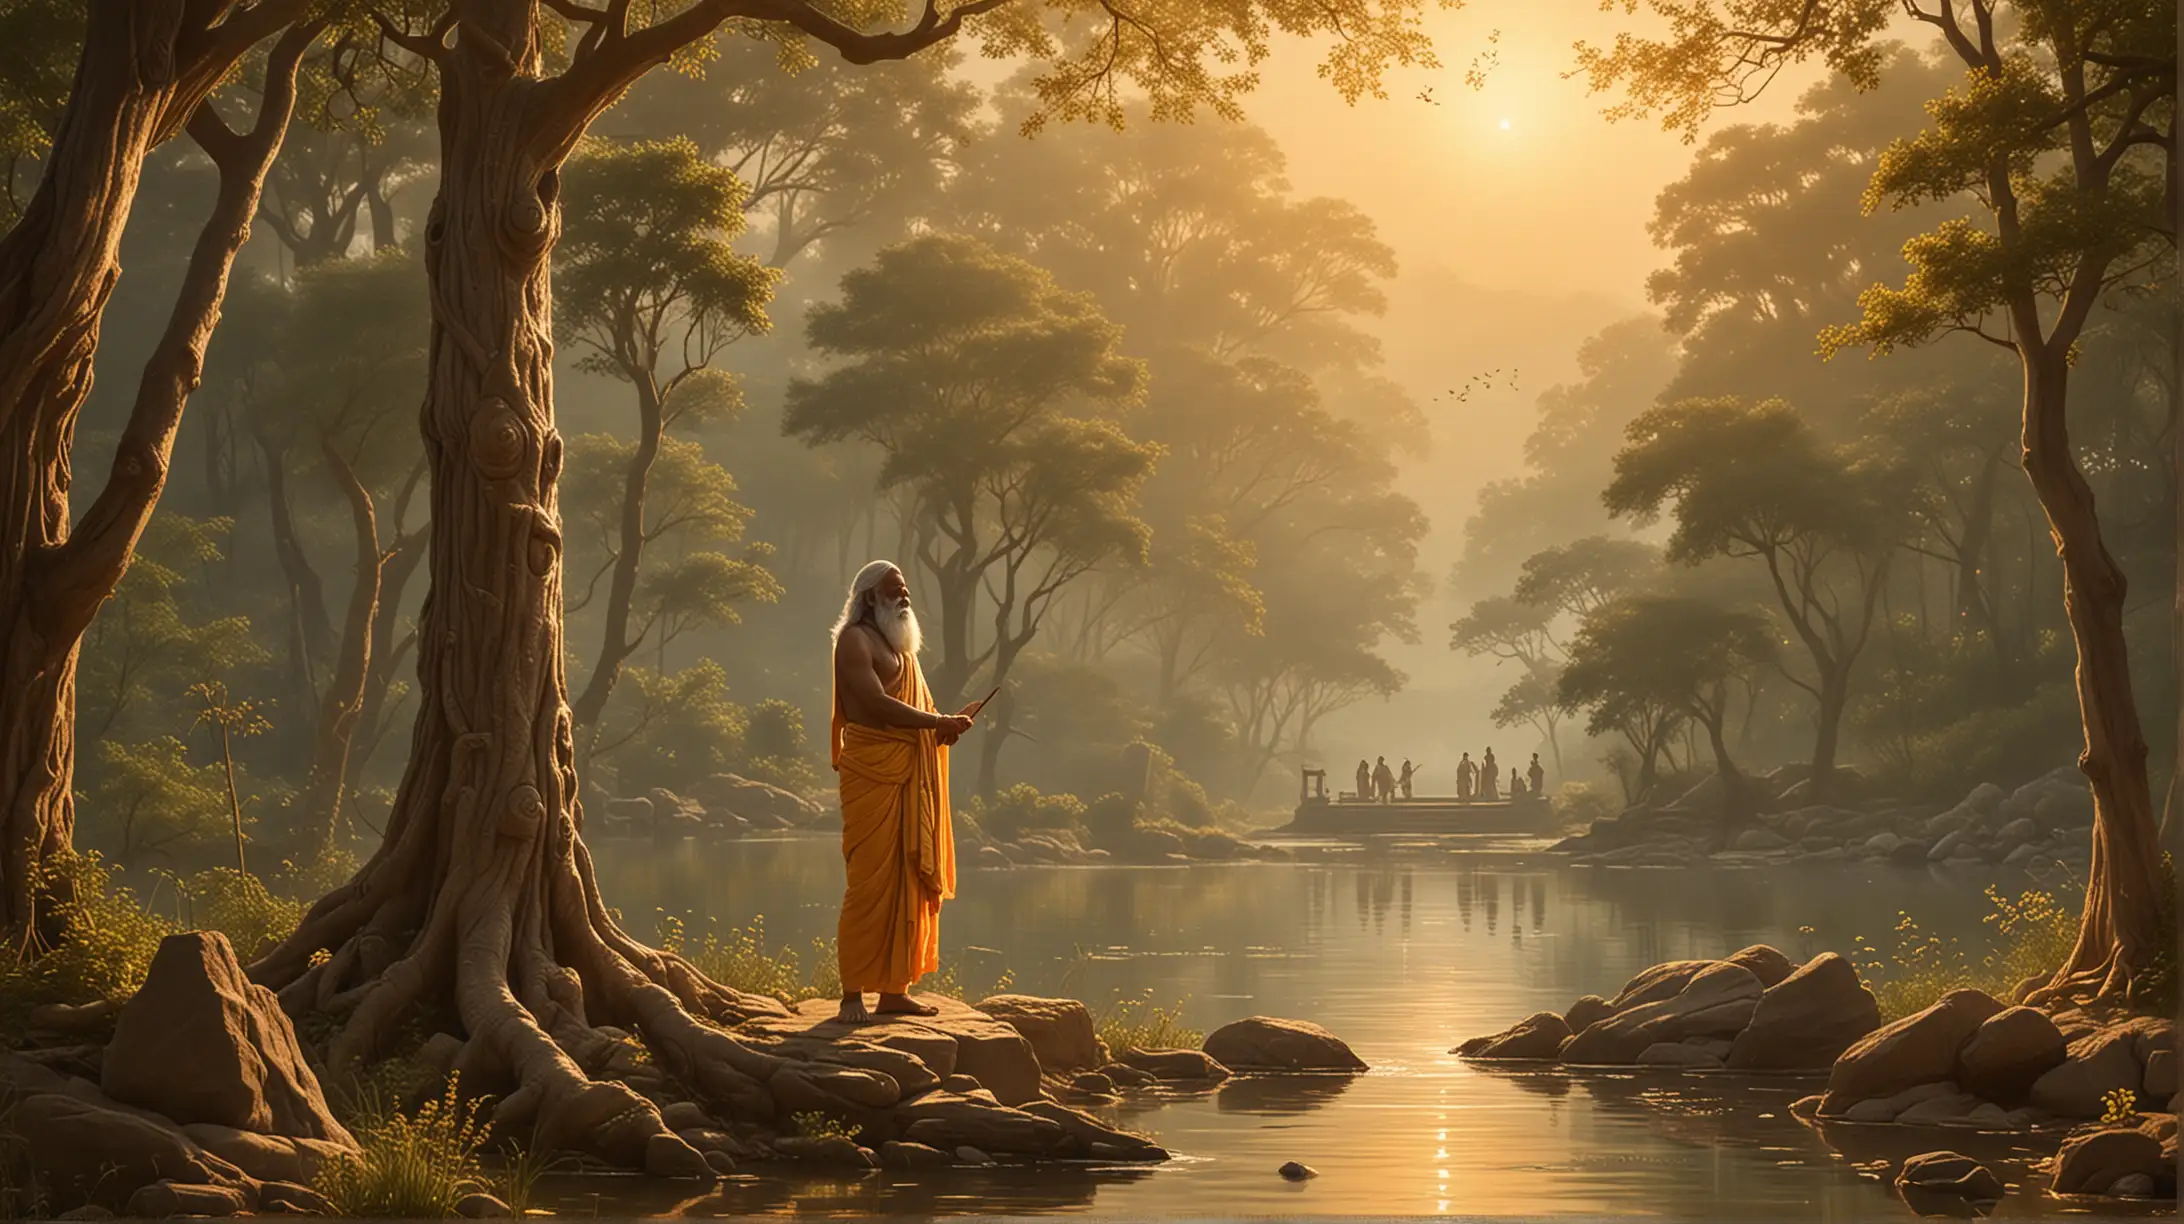 Generate Valmiki, the revered sage in standing position amidst the tranquil surroundings of his ashram. The scene is illuminated by a soft, golden light, symbolizing the divine inspiration bestowed upon him by Brahma. Valmiki's expression is one of profound concentration and introspection as he gazes into the distance, his eyes reflecting the inner vision granted to him by the divine. In the background, ethereal imagery evokes the timeless story of Rama, with symbols representing key moments from the epic tale subtly woven into the landscape. A sense of sacredness and reverence permeates the scene, capturing the moment of Valmiki's revelation as he begins to compose the immortal verses of the Ramayana  in multiple poses.